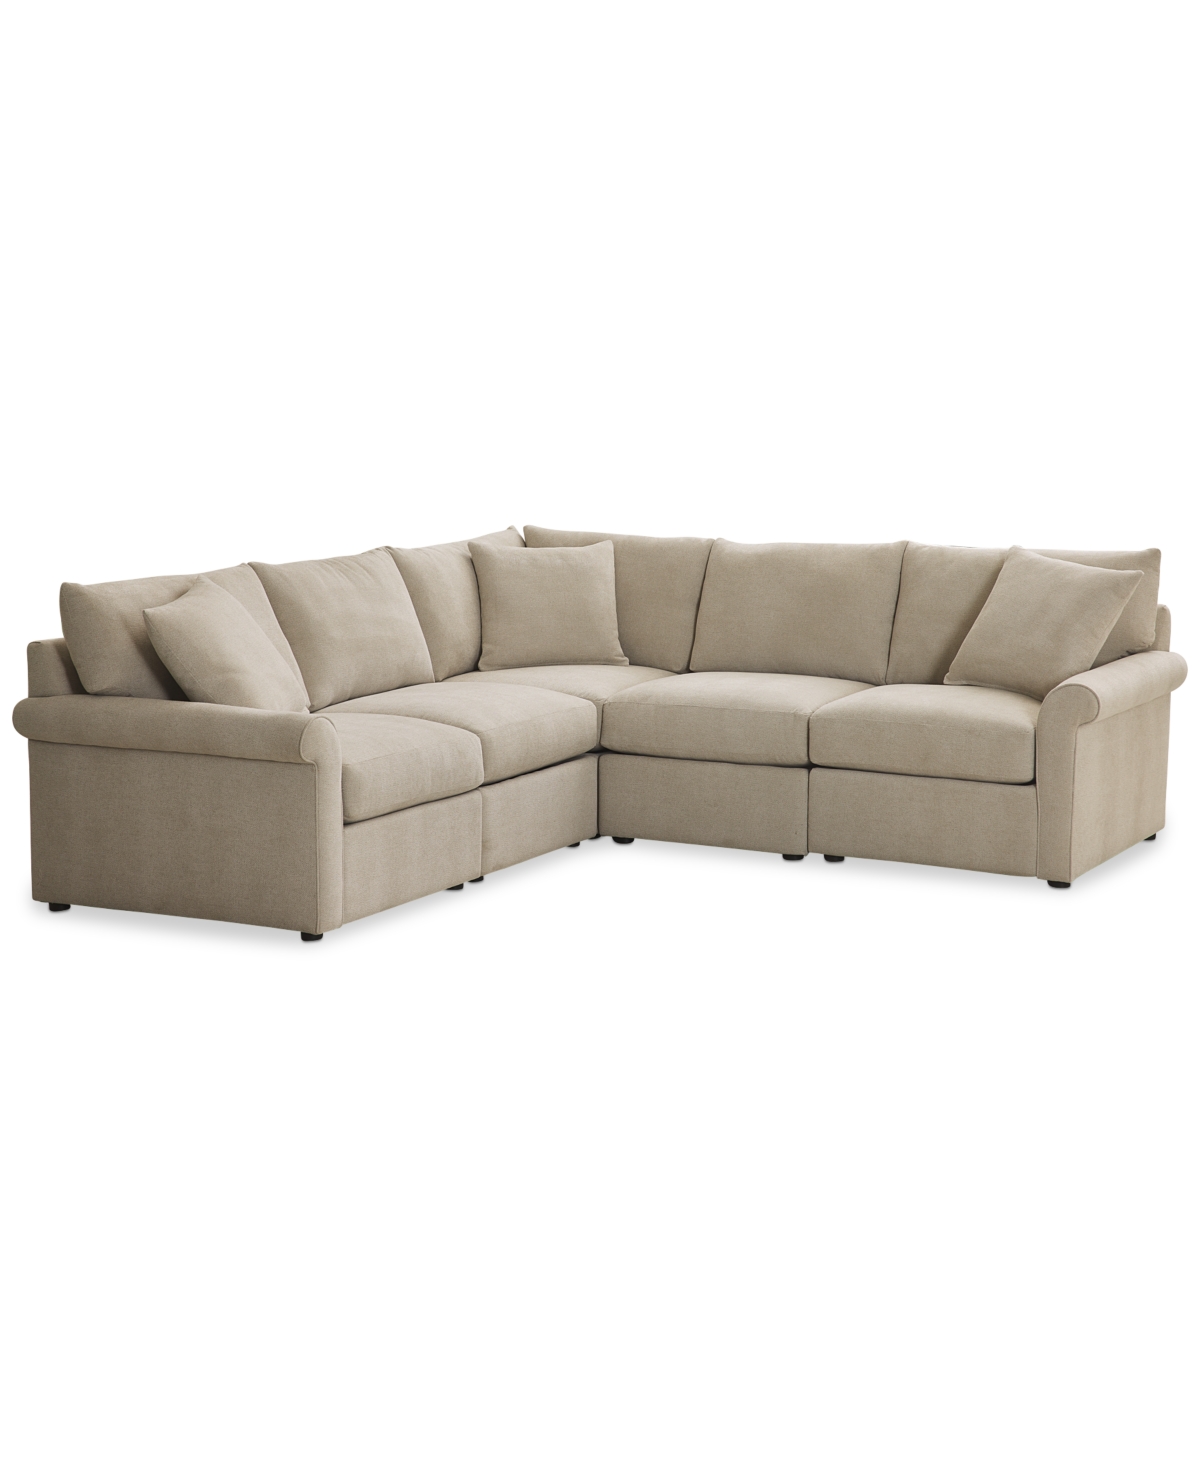 Furniture Wrenley 102" 5-pc. L-shape Modular Sectional Sofa, Created For Macy's In Dove